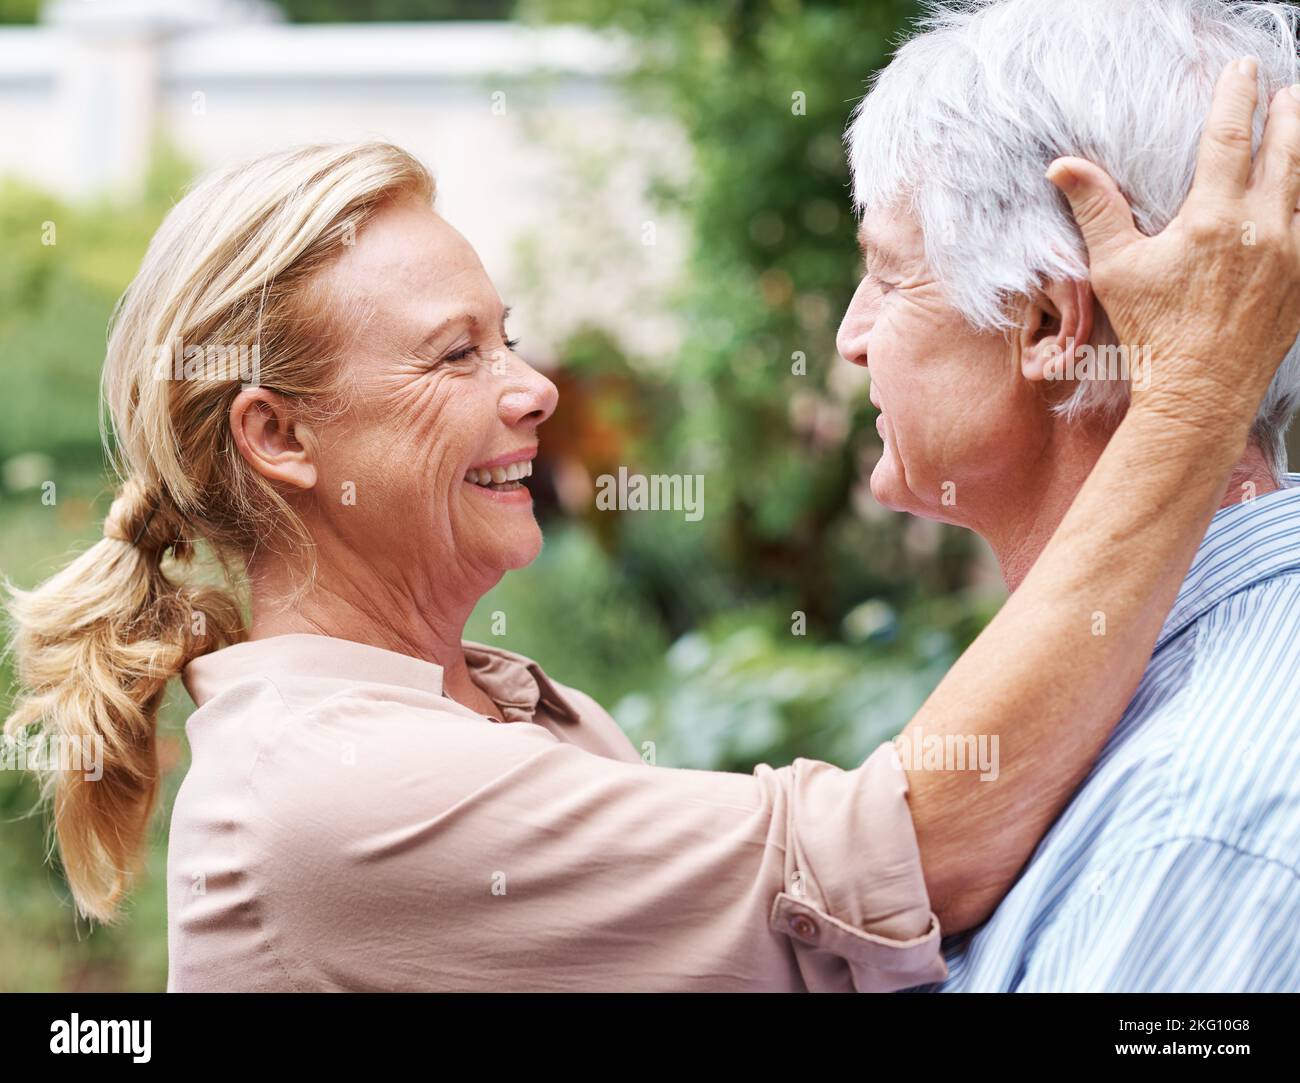 True love has no expiration date. an elderly couple rmbracing each other. Stock Photo